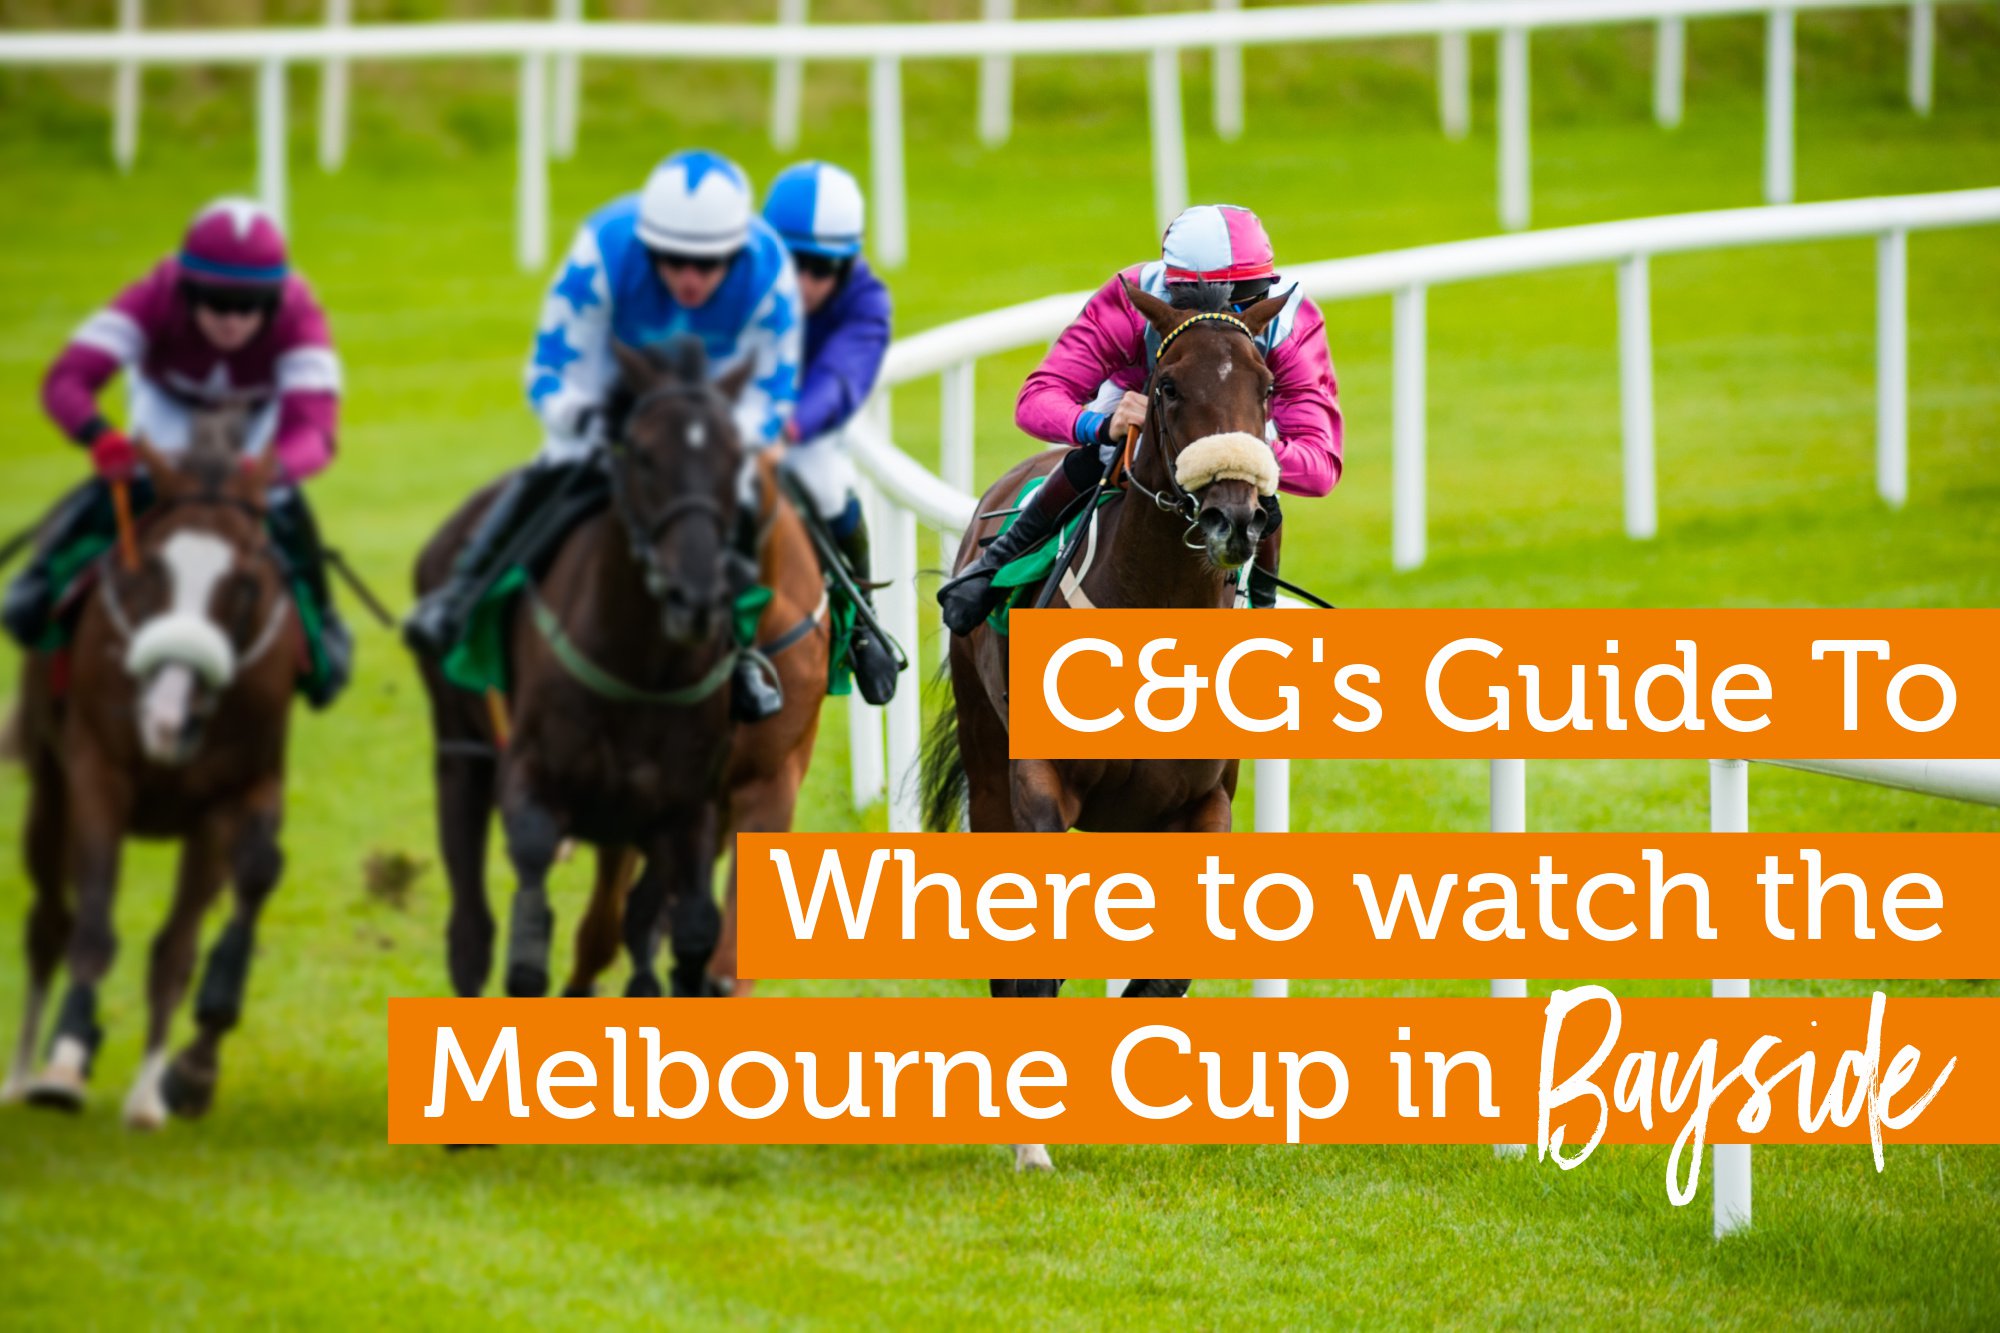 C&G’s Guide To: Where To Watch The Melbourne Cup In Bayside